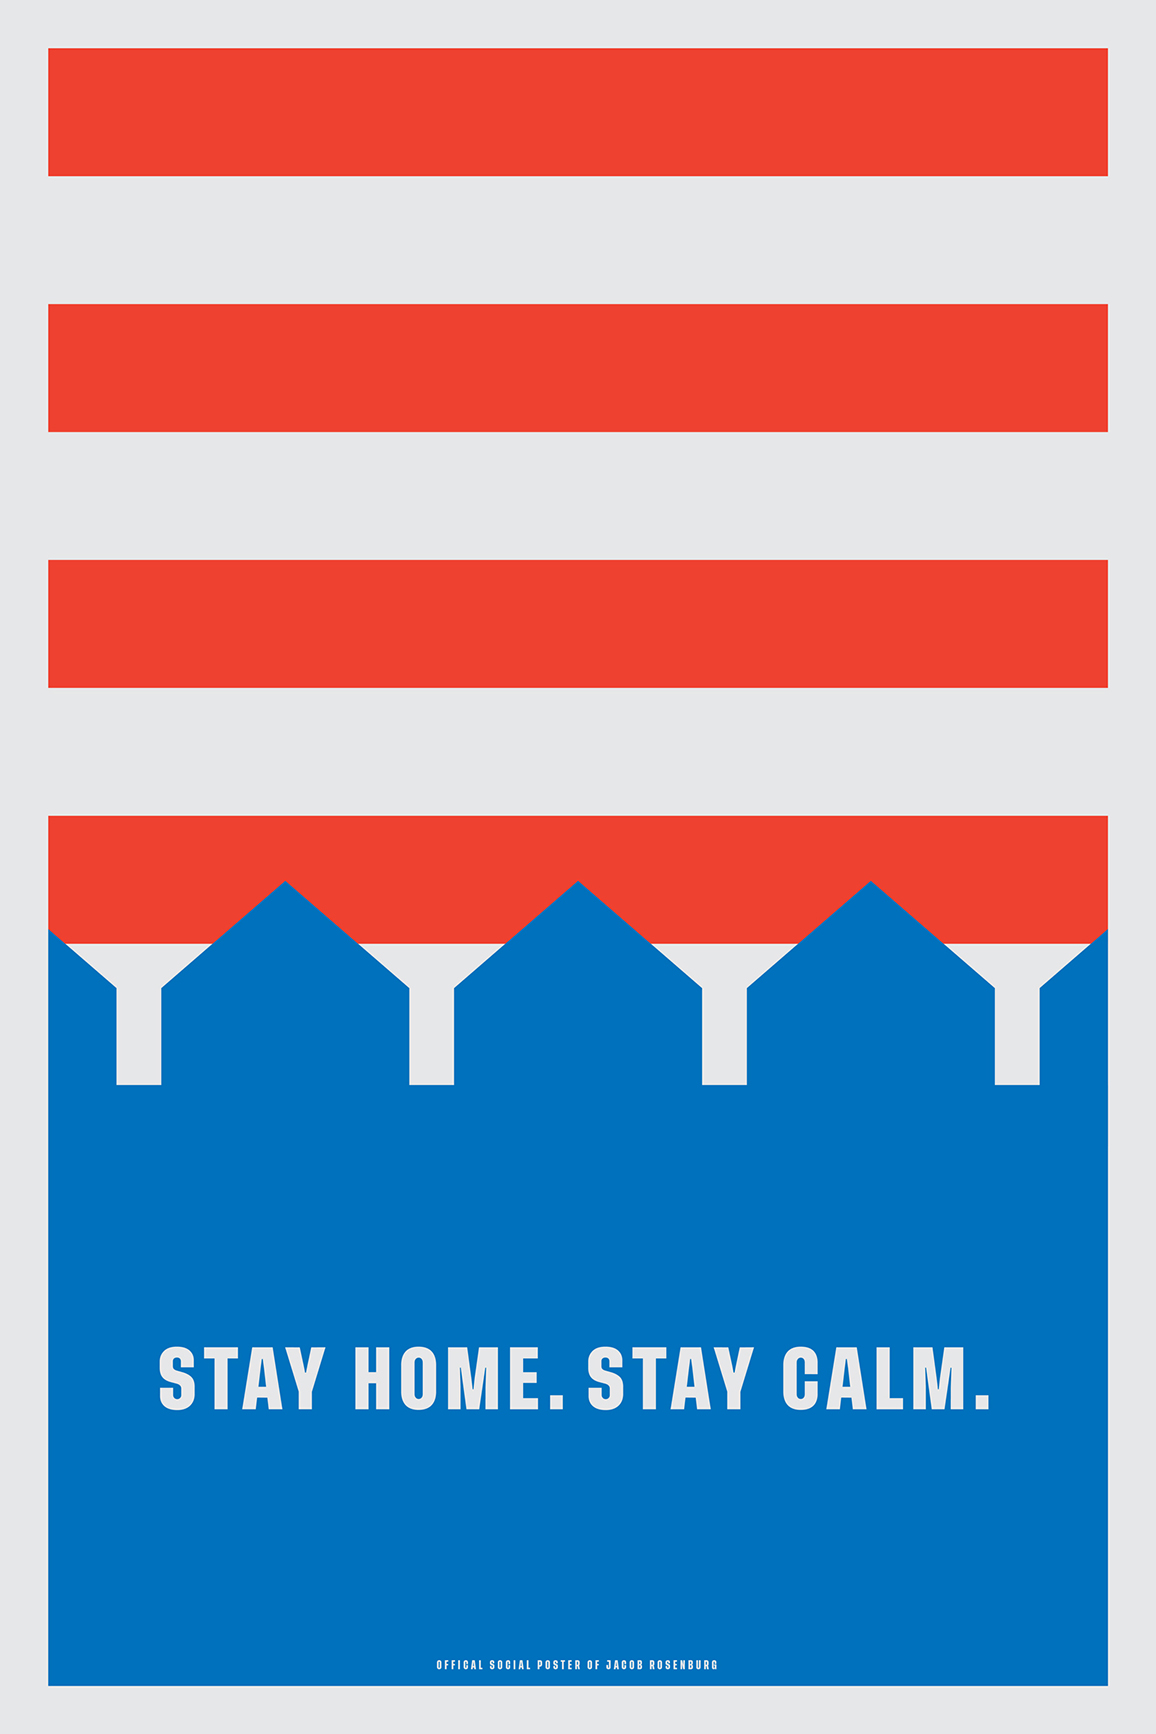 Stay Home. Stay Calm.